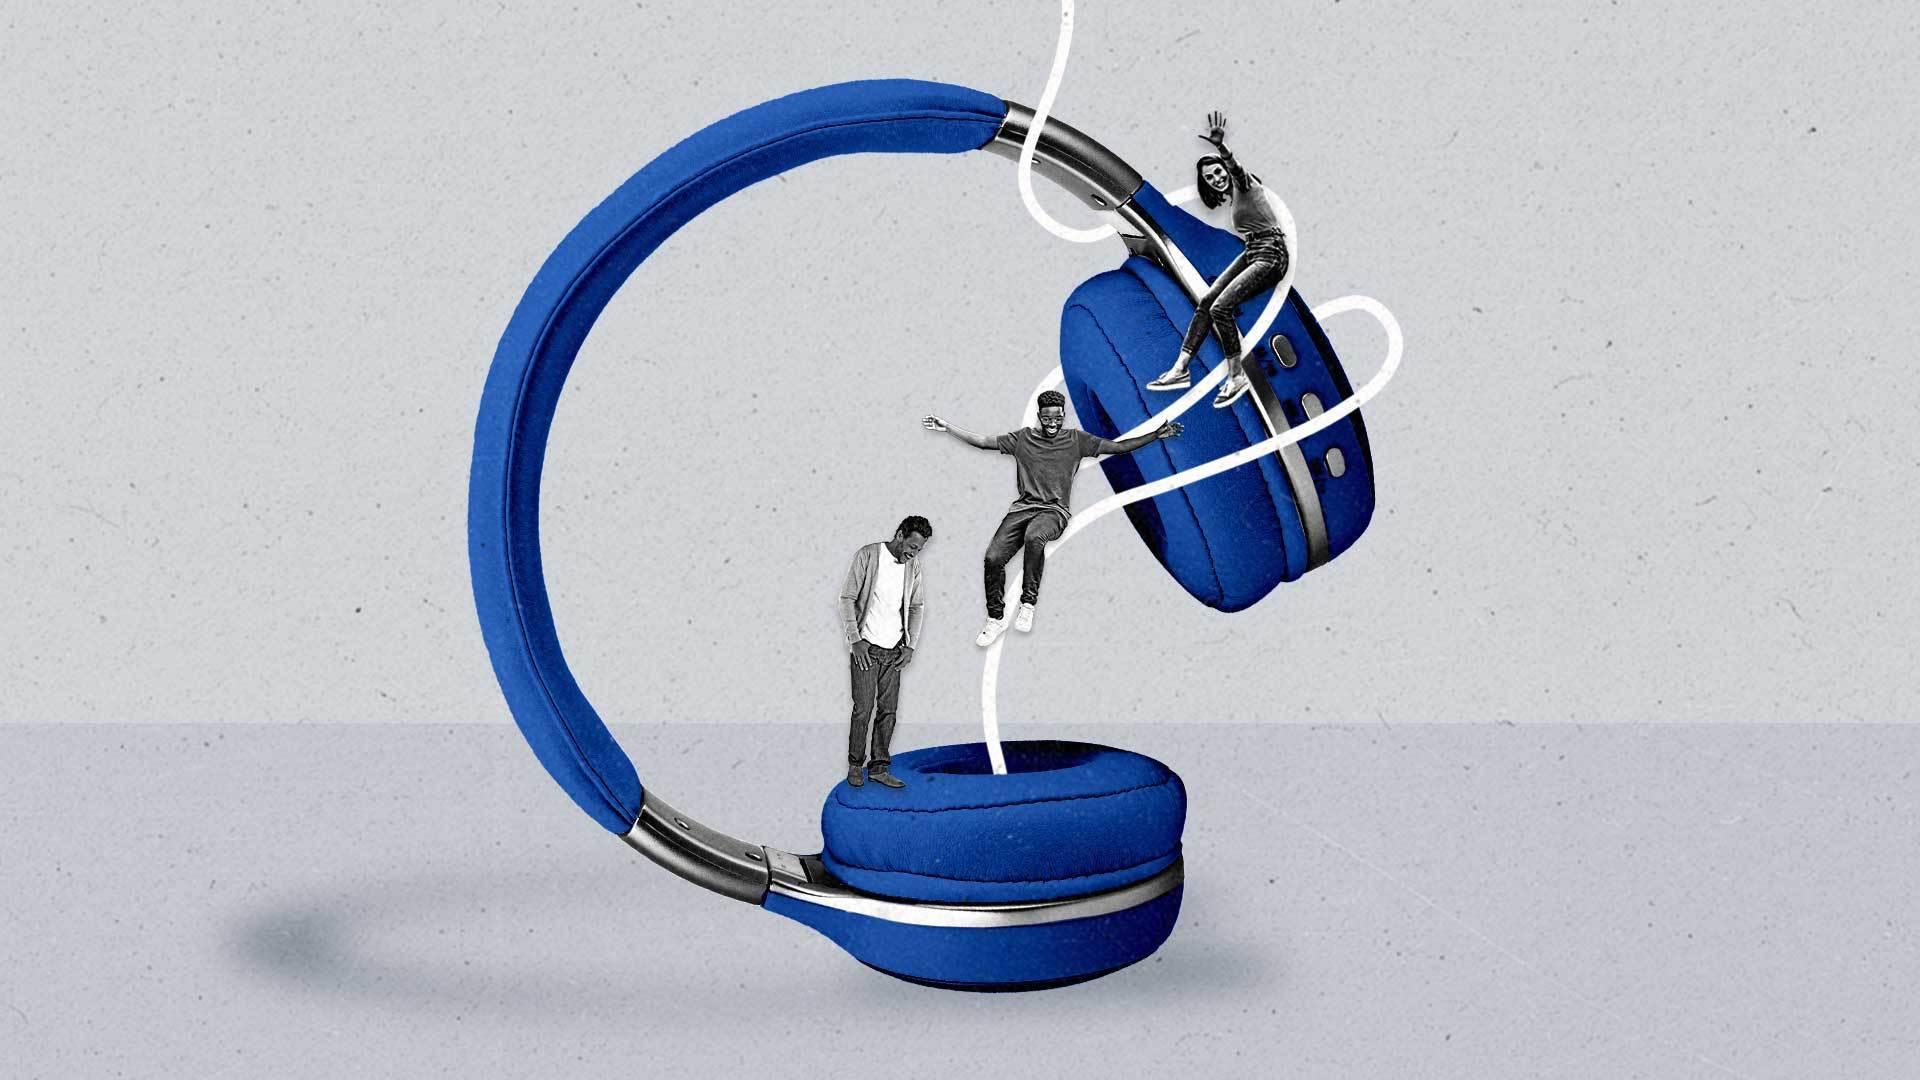 Two people happily slide down a wire into an oversized pair of headphones as another person looks on in delight.